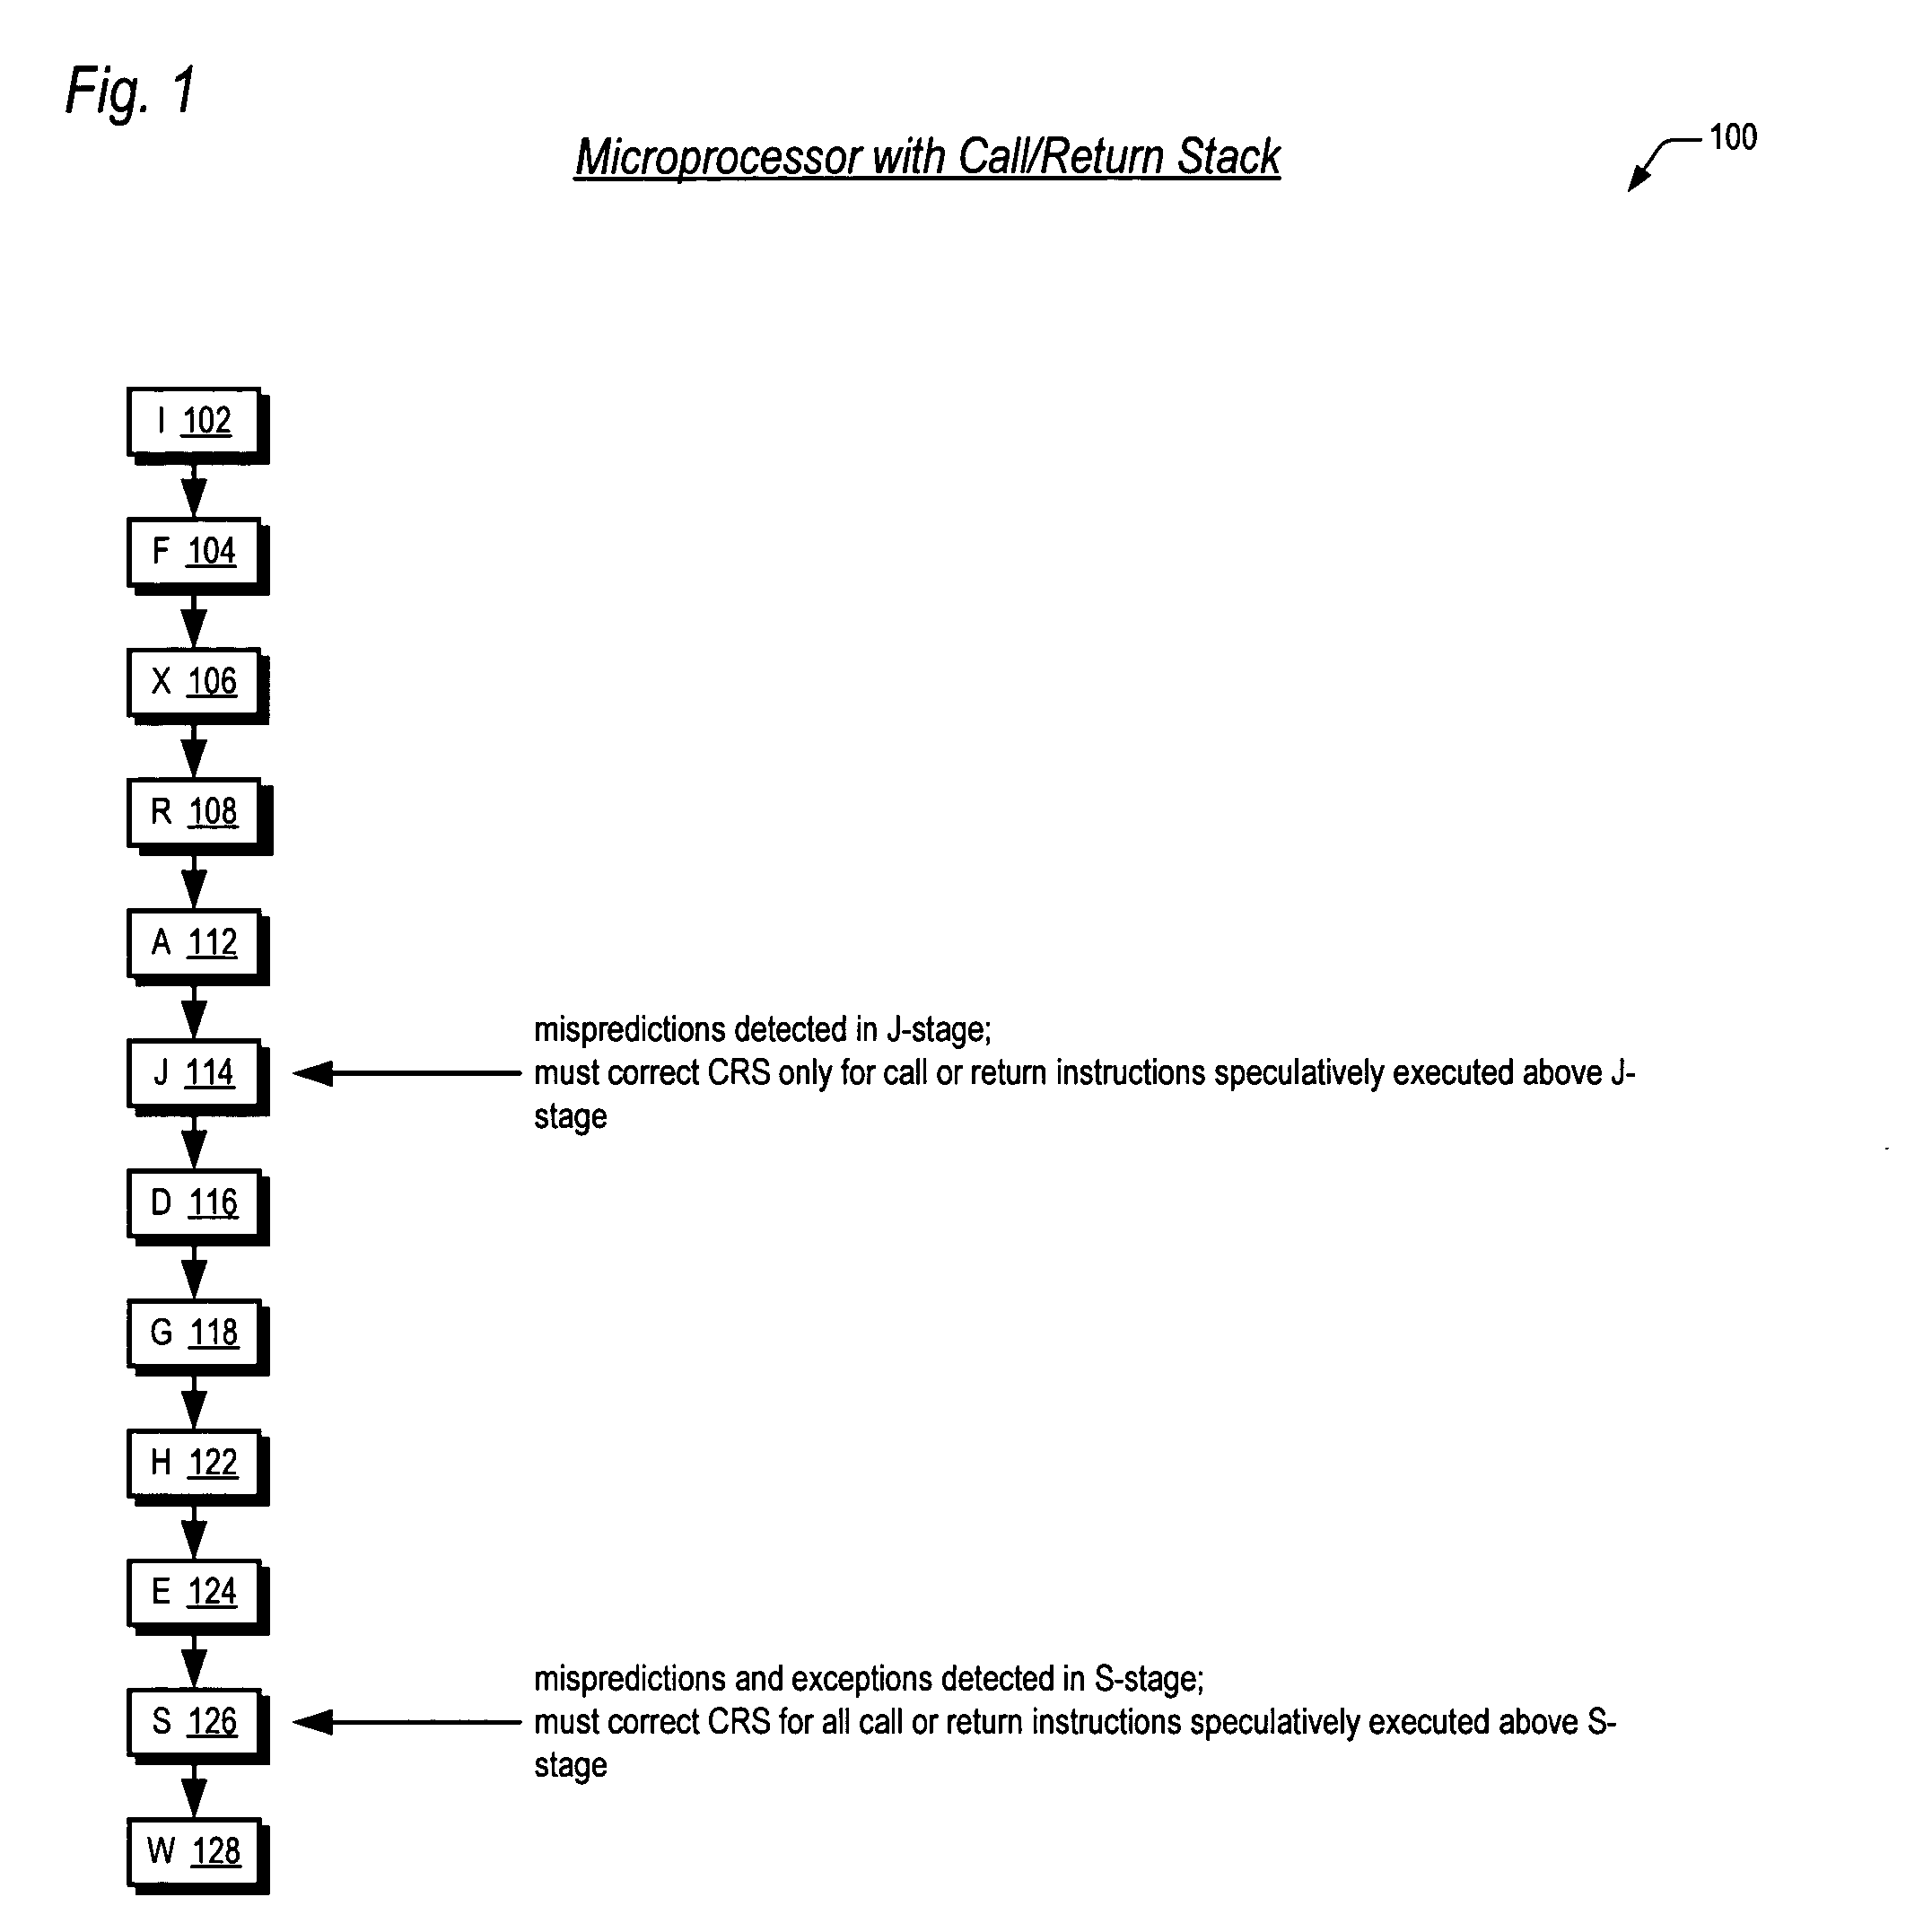 Method and apparatus for correcting an internal call/return stack in a microprocessor that detects from multiple pipeline stages incorrect speculative update of the call/return stack